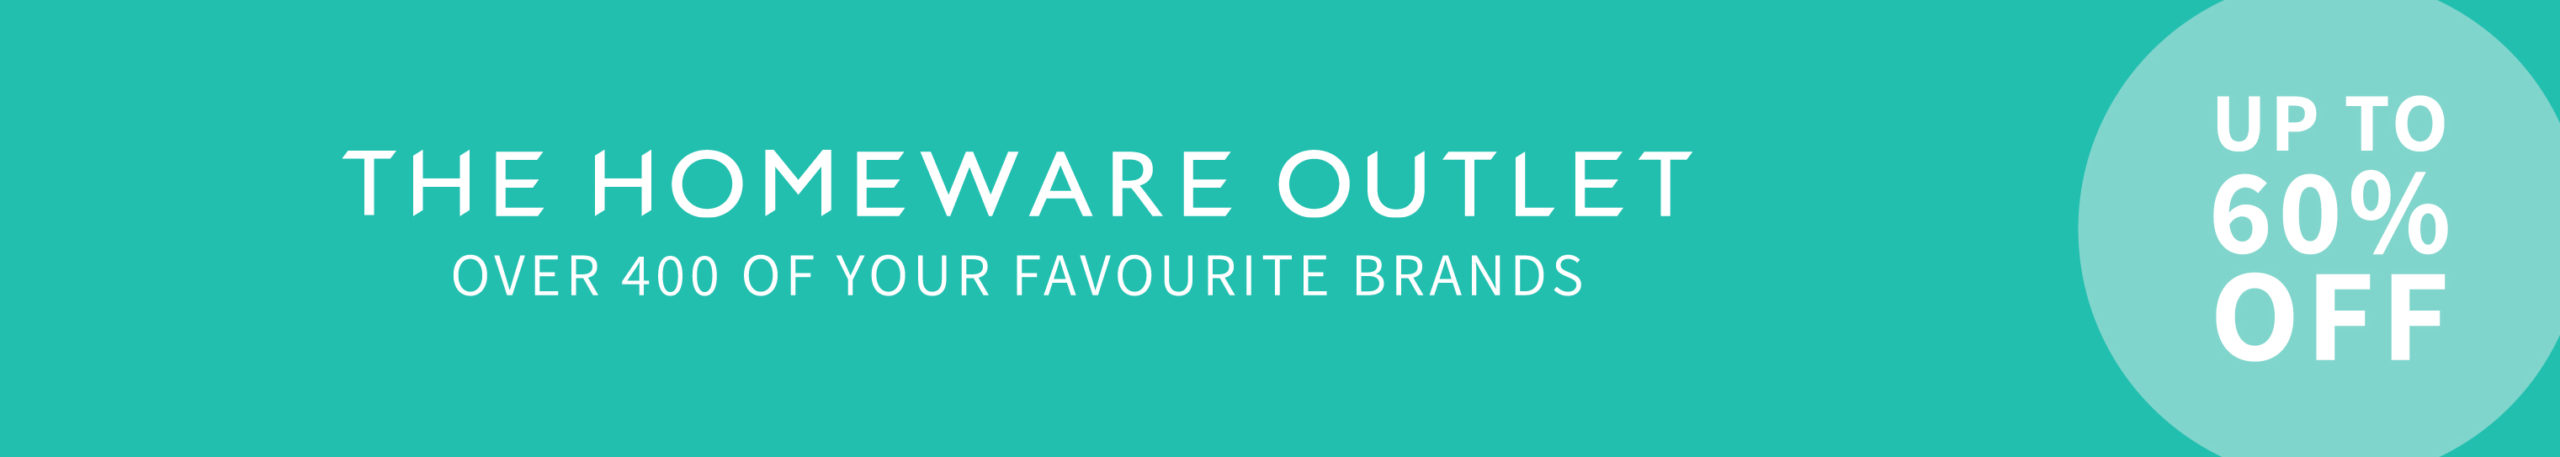 The Homeware Outlet - 60% off over 400 of your favourite brands